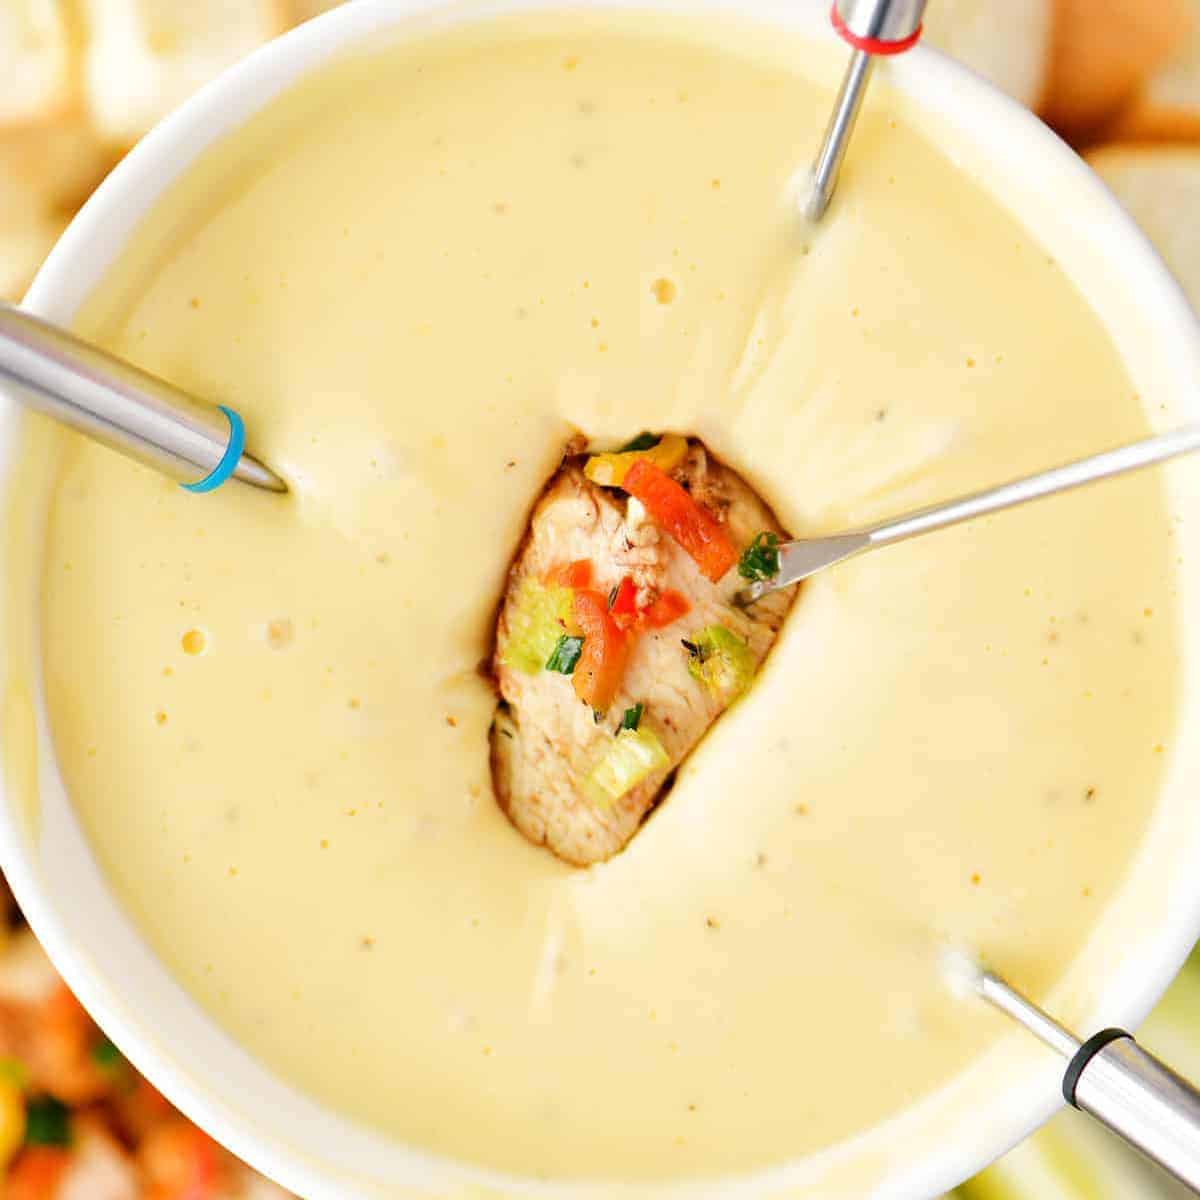 a piece of chicken being dipped into smoked gouda fondue.